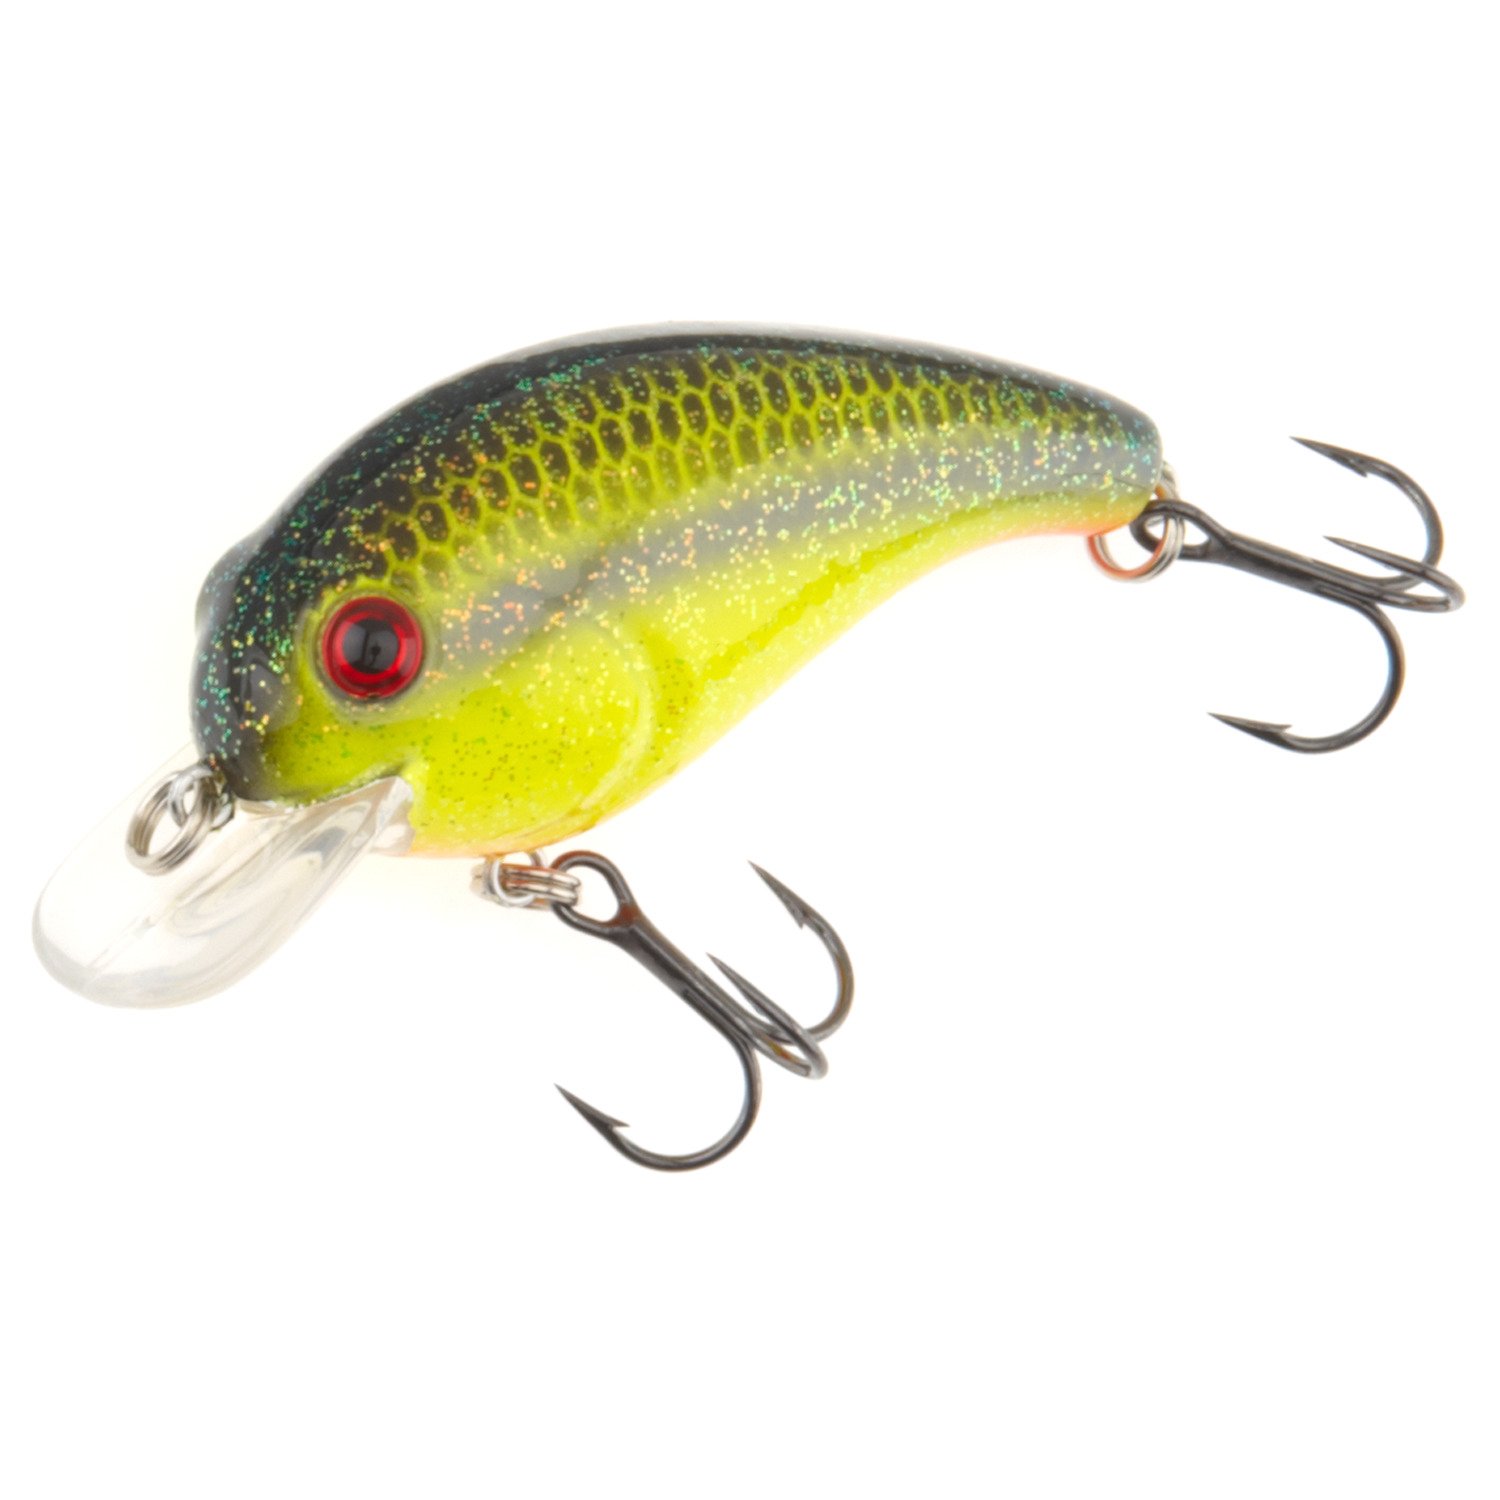 H2O Xpress - Jointed Shad Bass Crankibait 